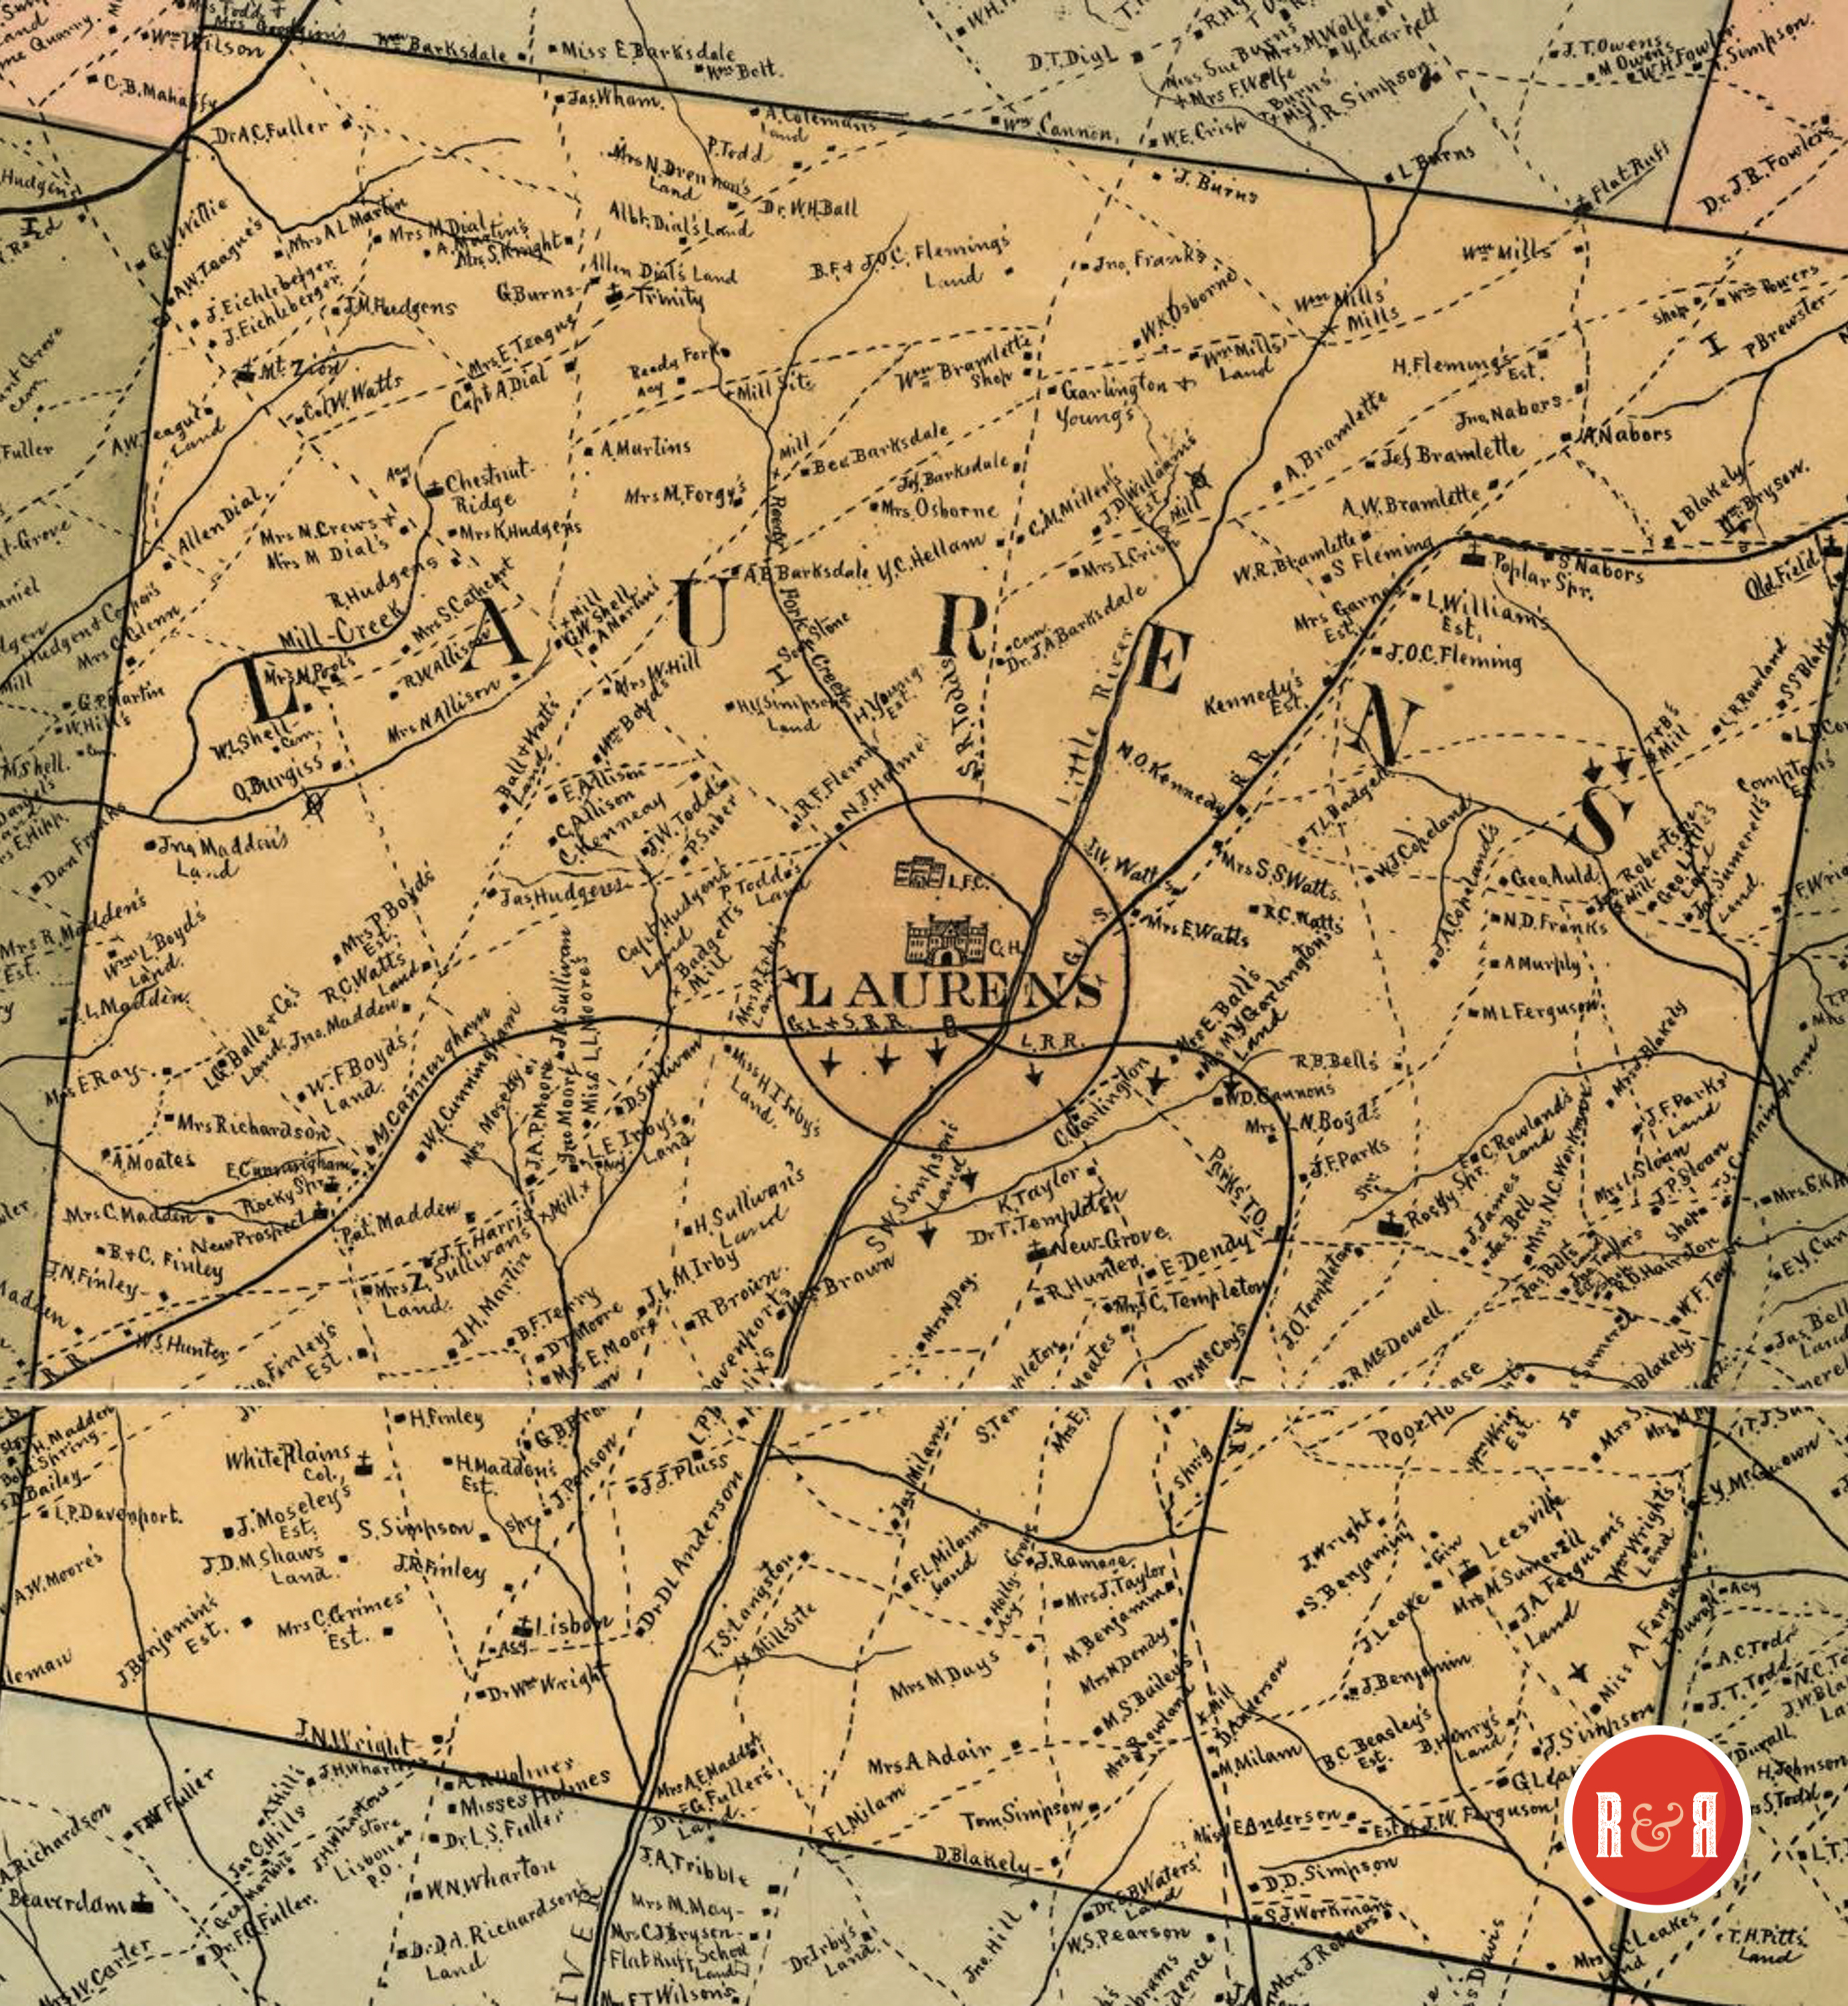 LAURENS TOWNSHIP MAP - ENLARGED